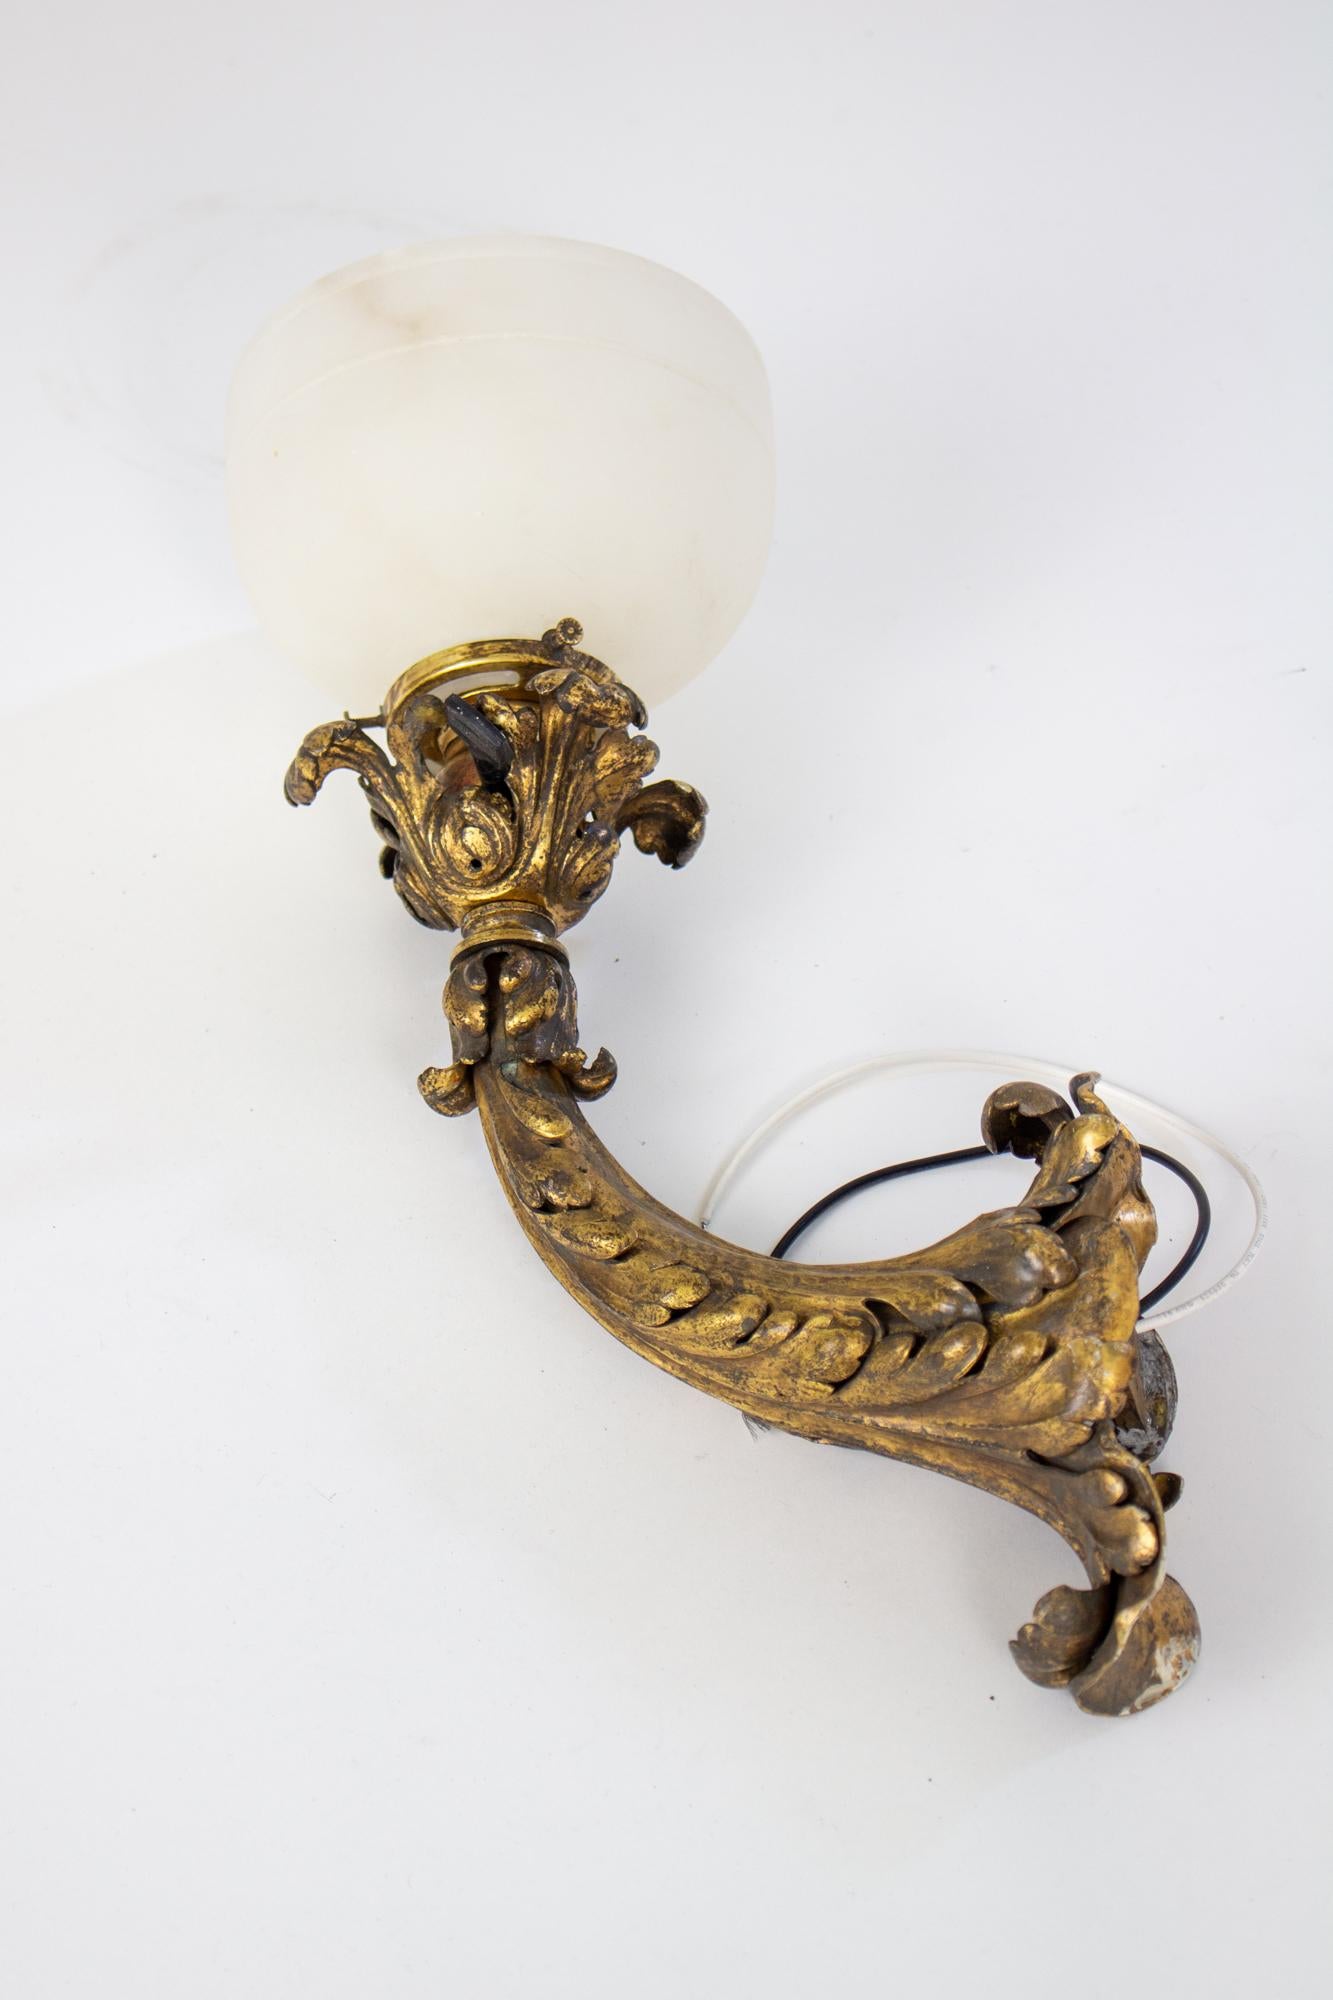 Neoclassical Revival Early 20th Century E.F.Caldwell Gilt Leafy Sconces with Alabaster Shade - a Pair For Sale